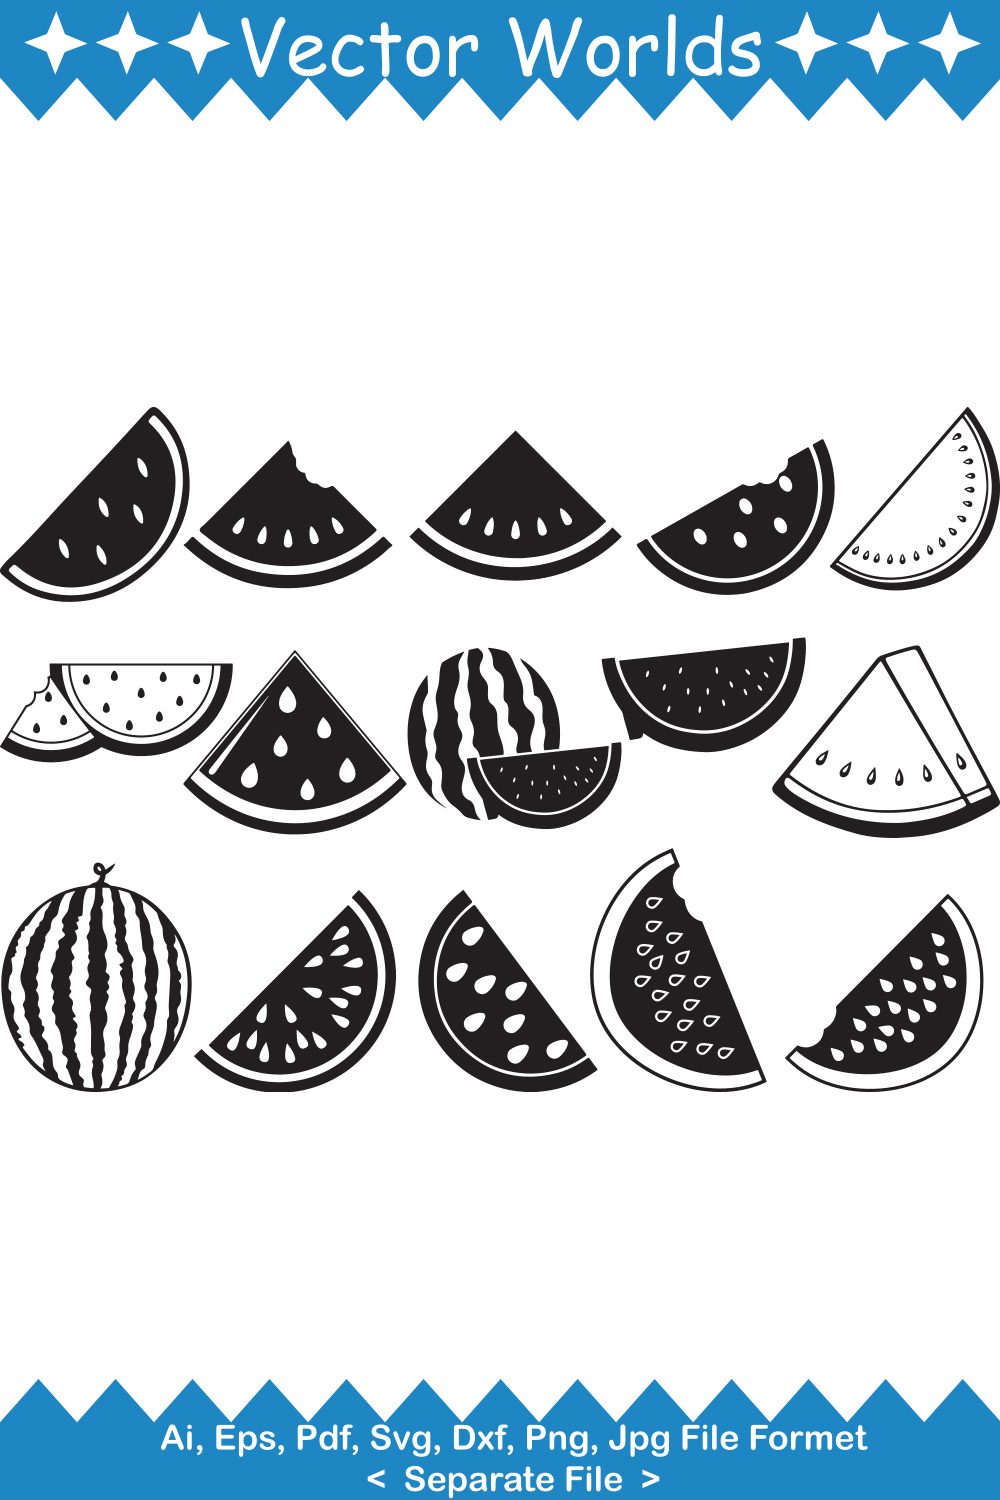 Pack of vector beautiful images of silhouettes of watermelons.